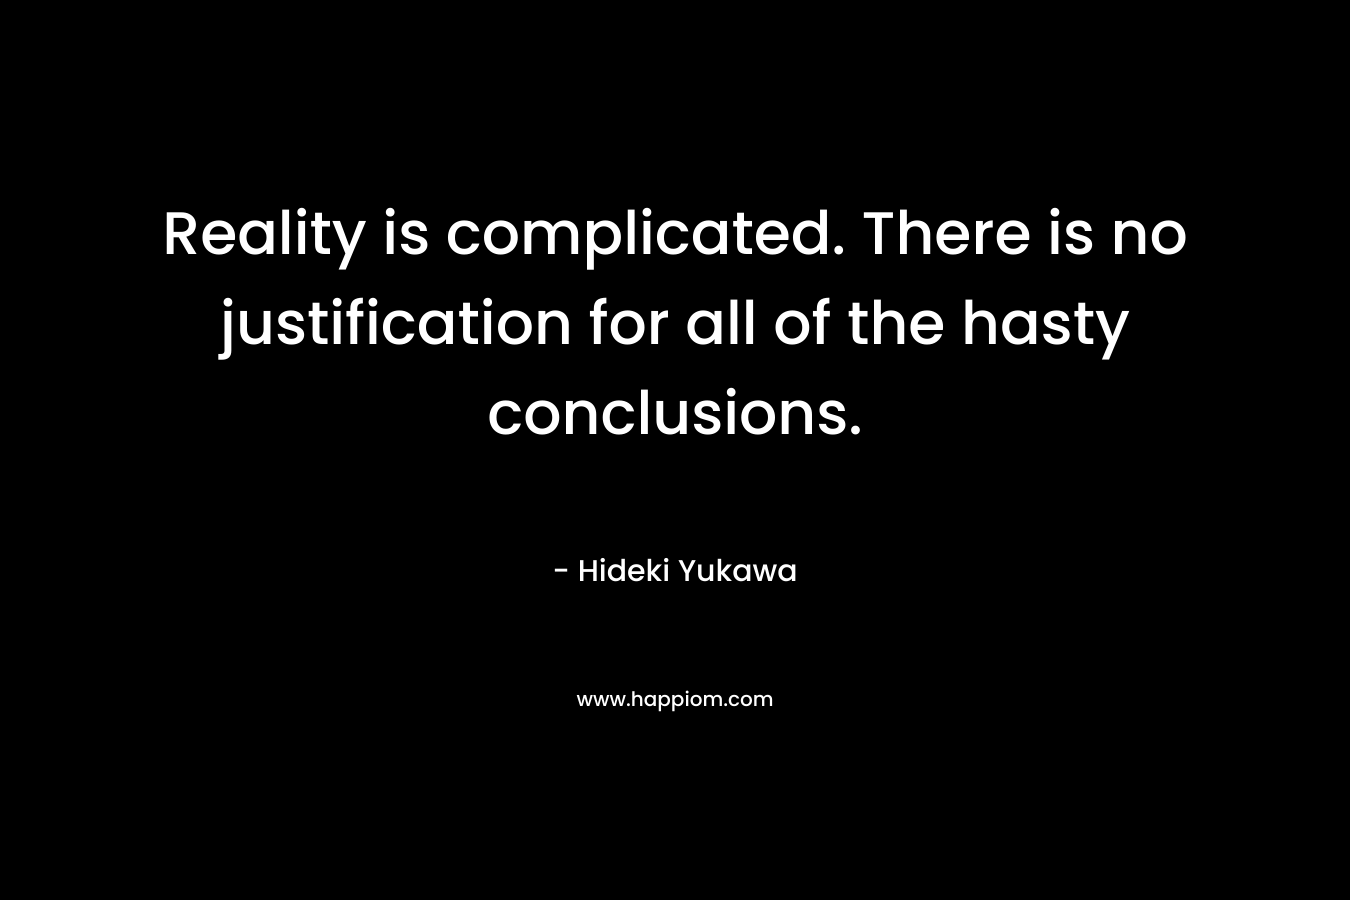 Reality is complicated. There is no justification for all of the hasty conclusions. – Hideki Yukawa